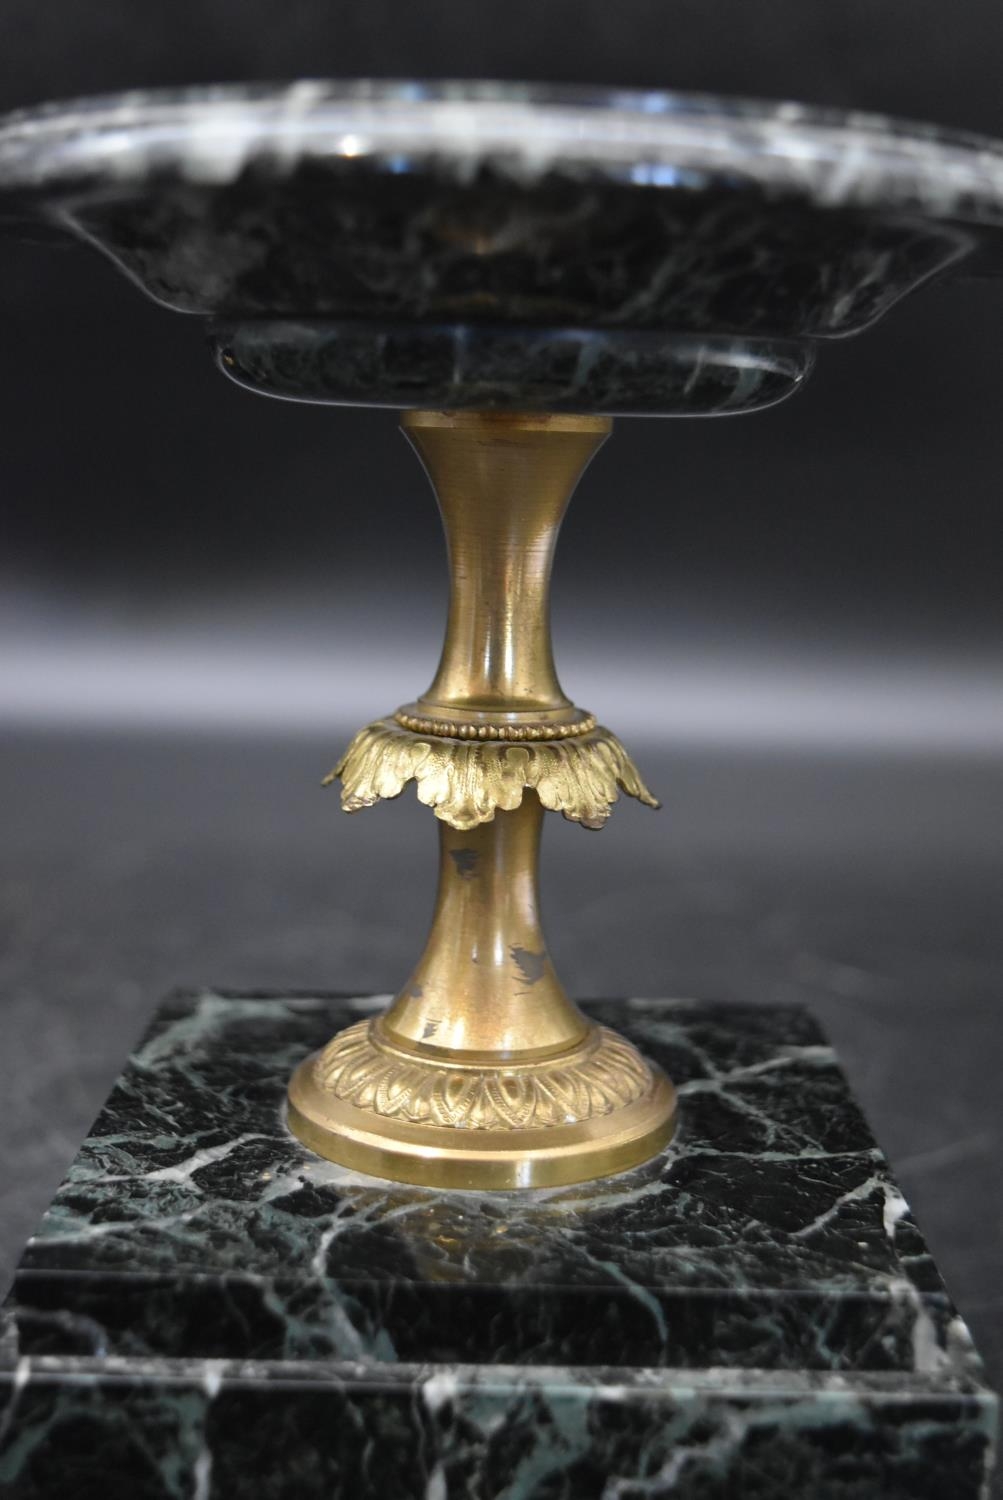 H. Perrin - A 19th century French garniture marble mantel clock and tazza form side pieces, - Image 13 of 15